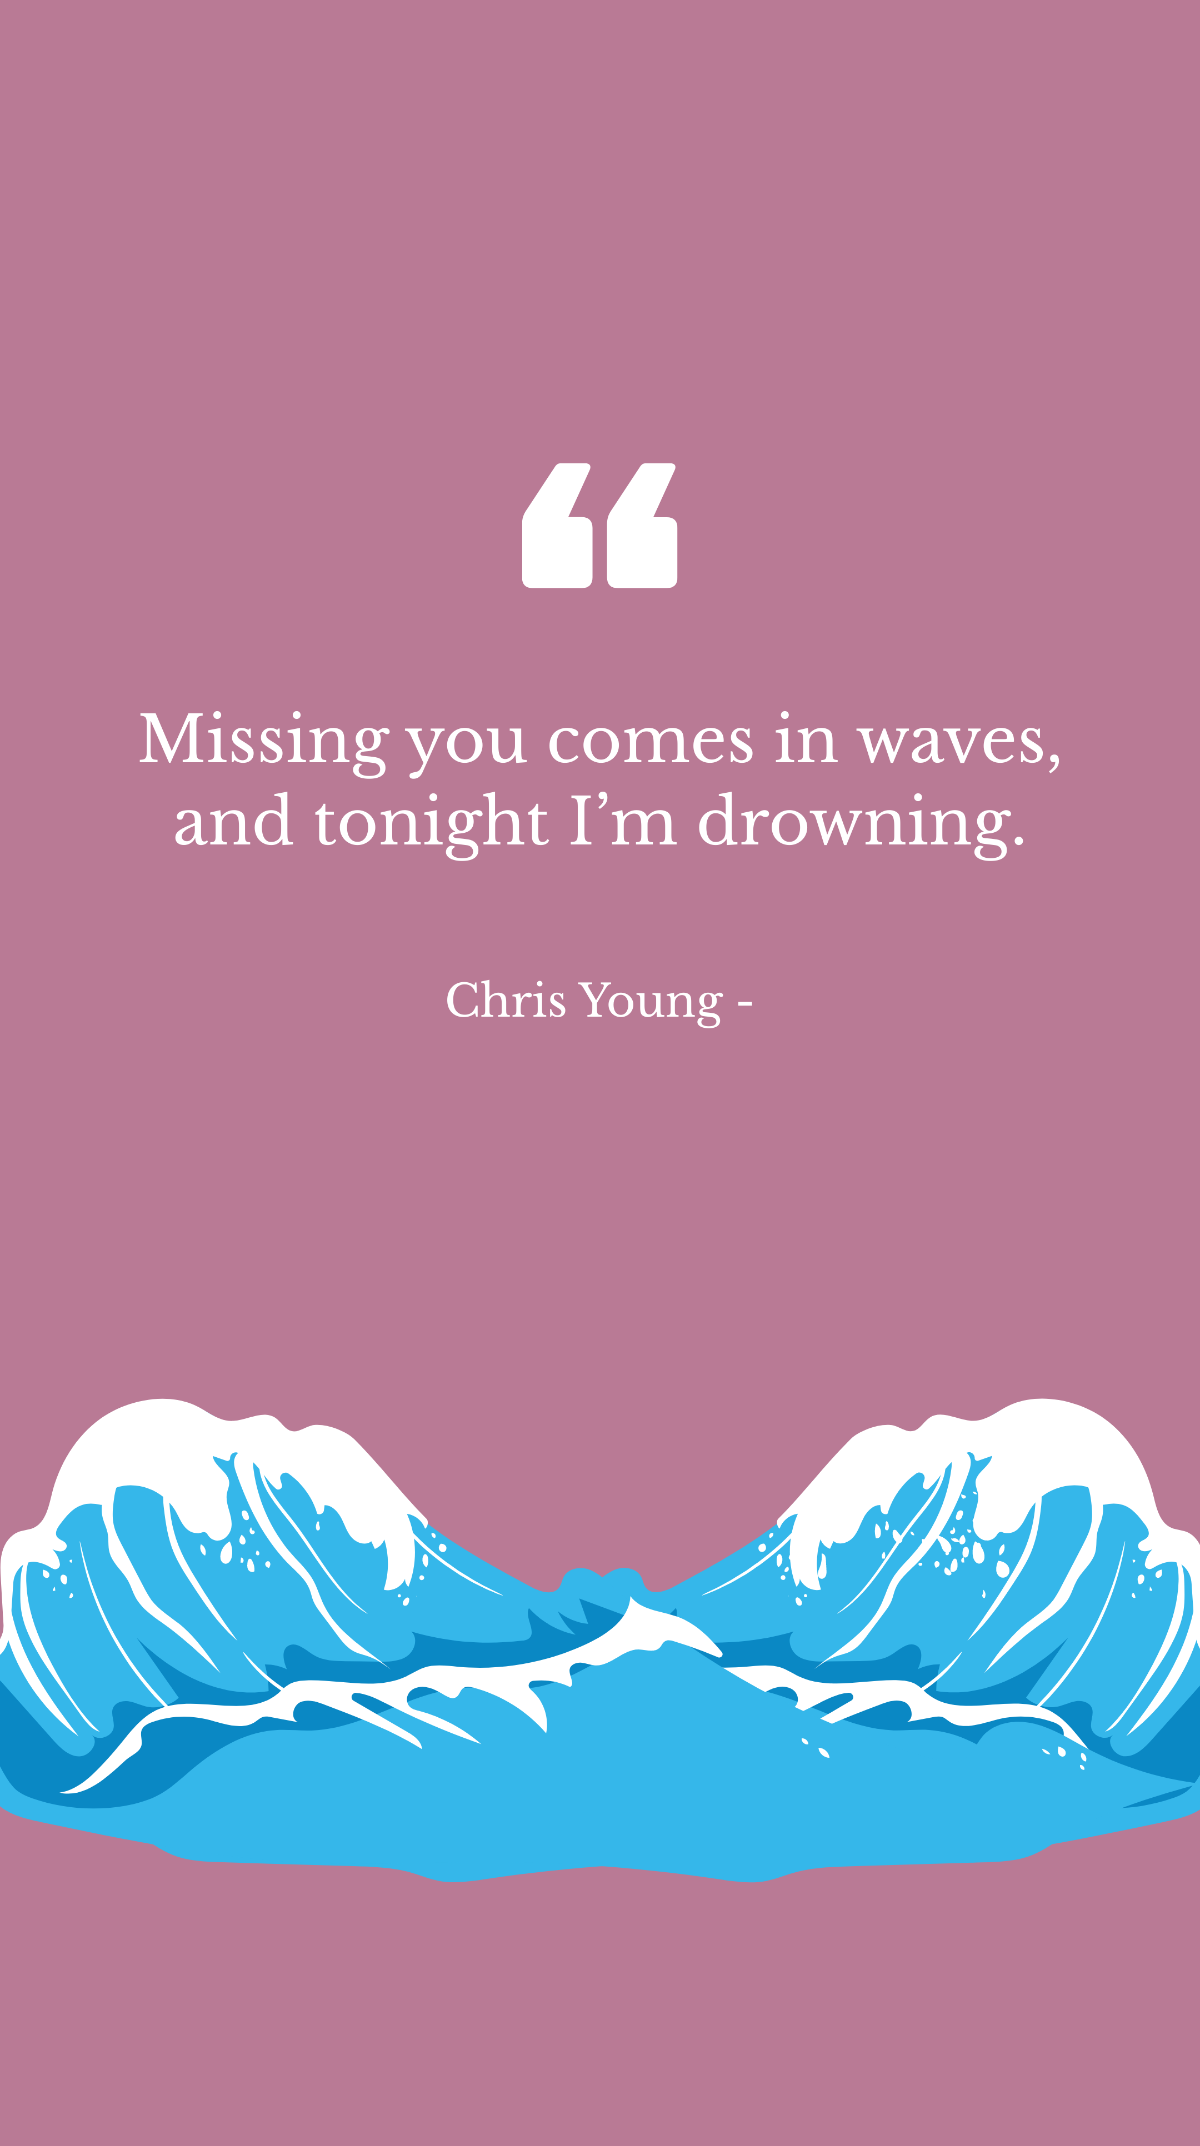 Free Chris Young - Missing you comes in waves, and tonight I’m drowning. Template